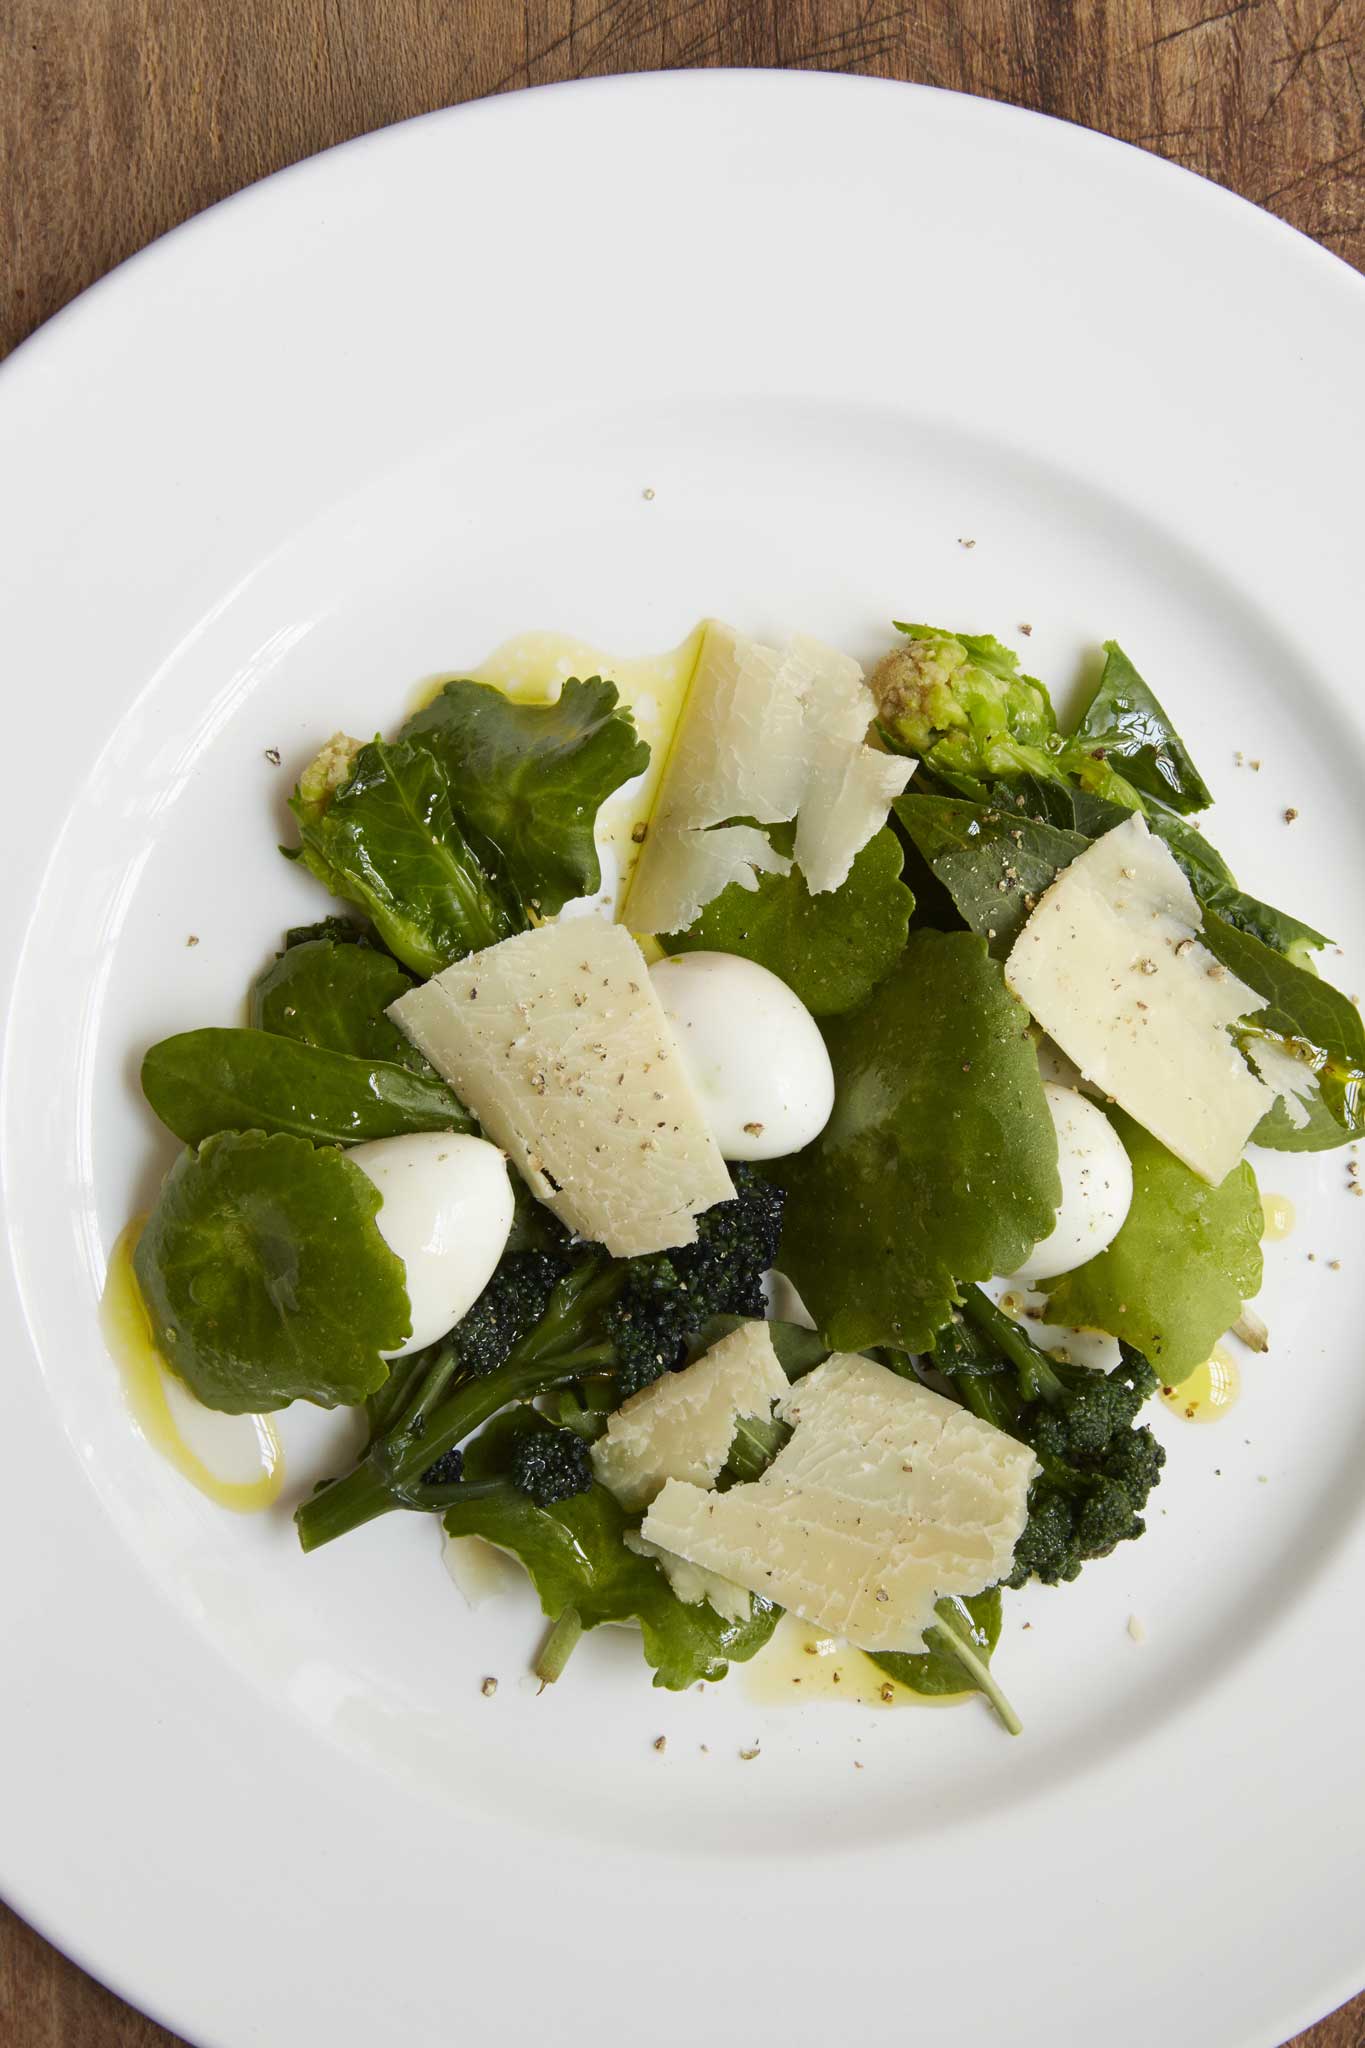 Sprouting broccoli and quail's egg salad with shaved Berkswell cheese (Jason Lowe)